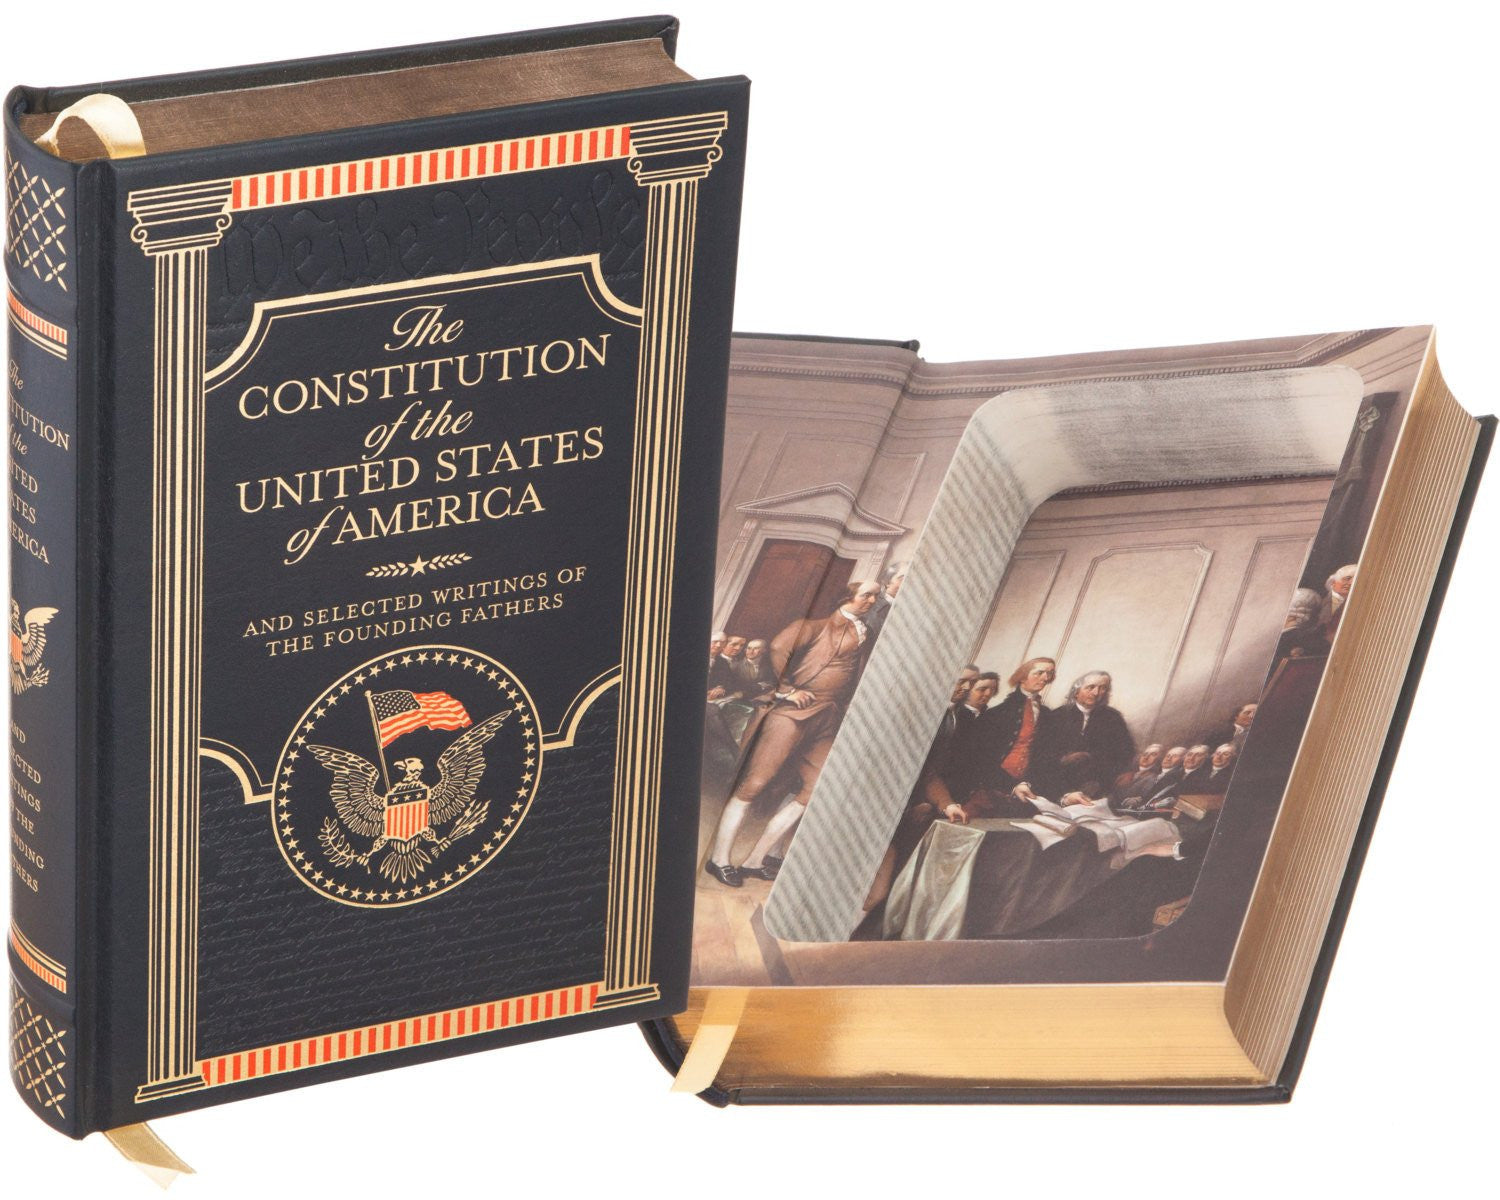 Hollow Book Safe: The Constitution of the United States of America by -  BookRooks